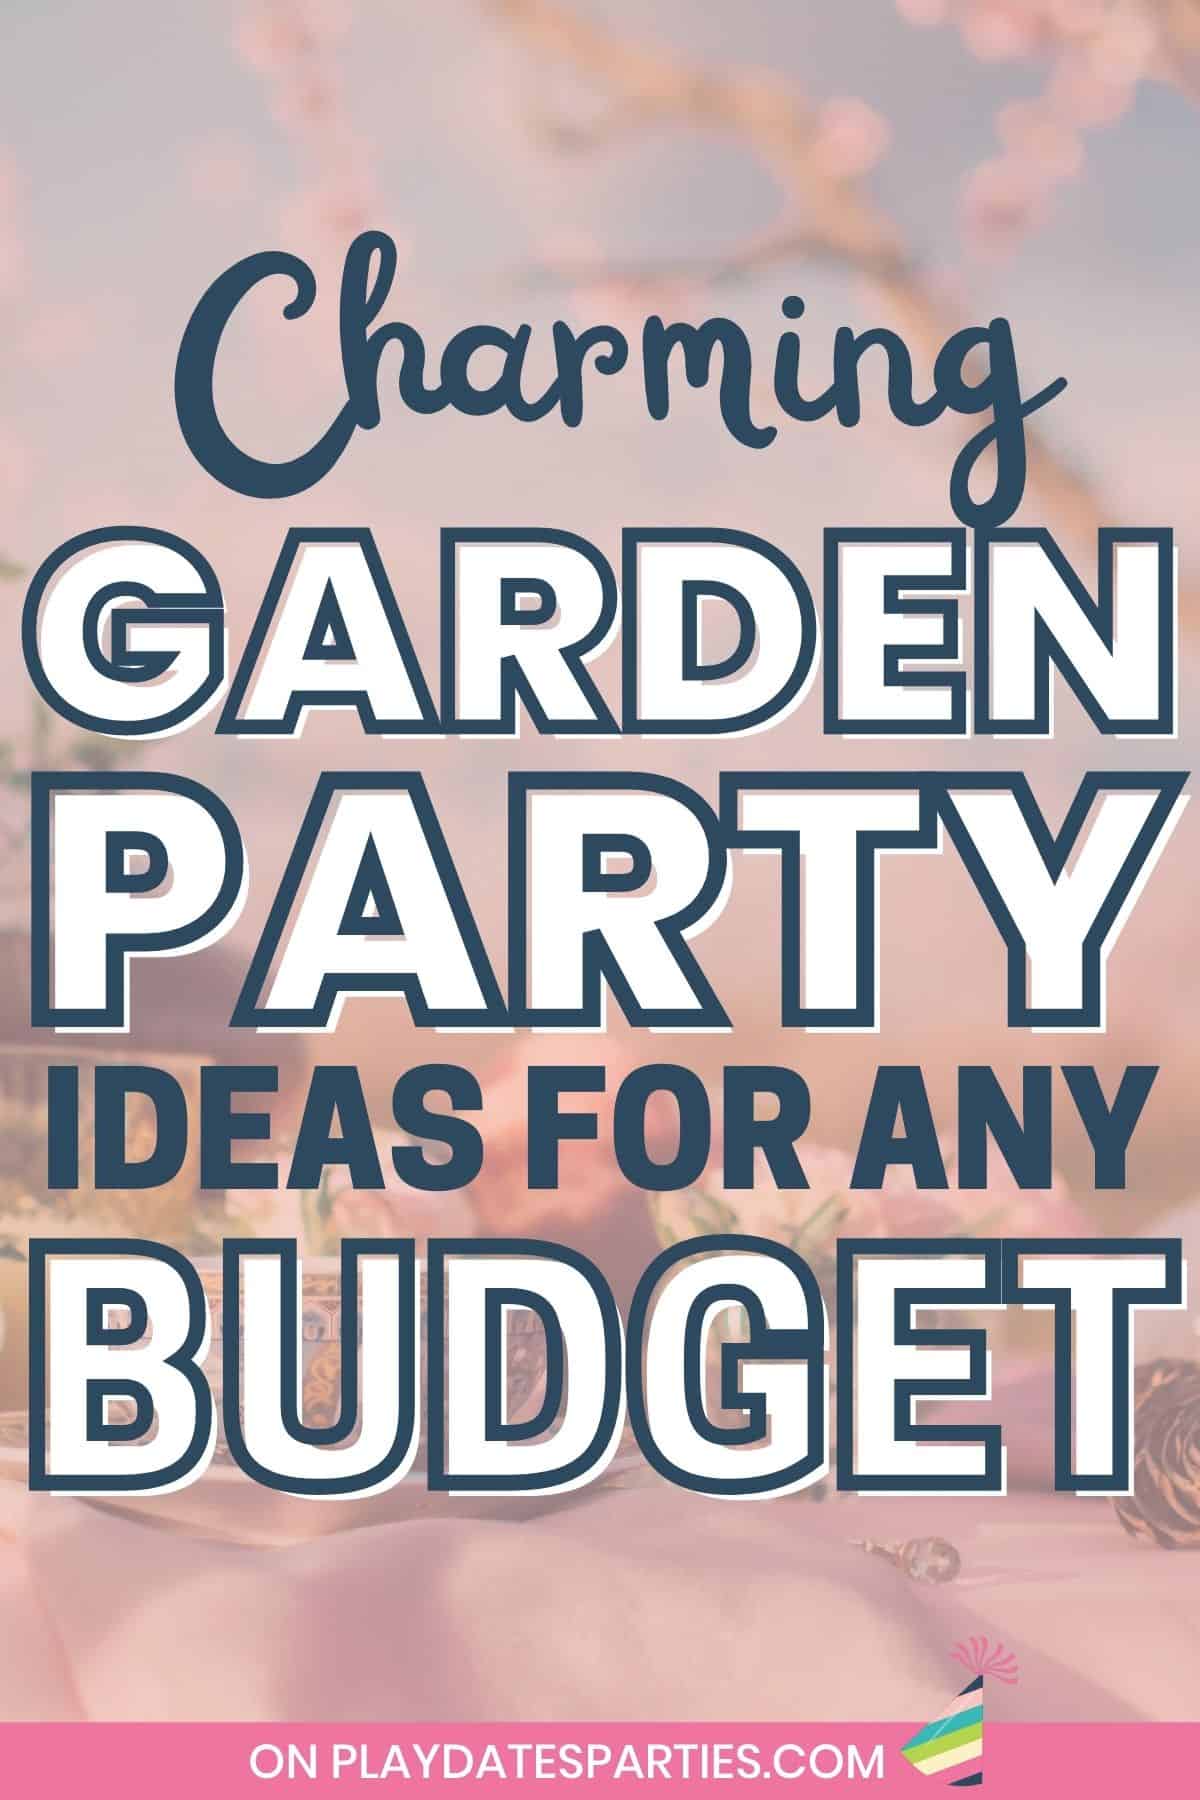 Pink graphic with text overlay charming garden party ideas for any budget.